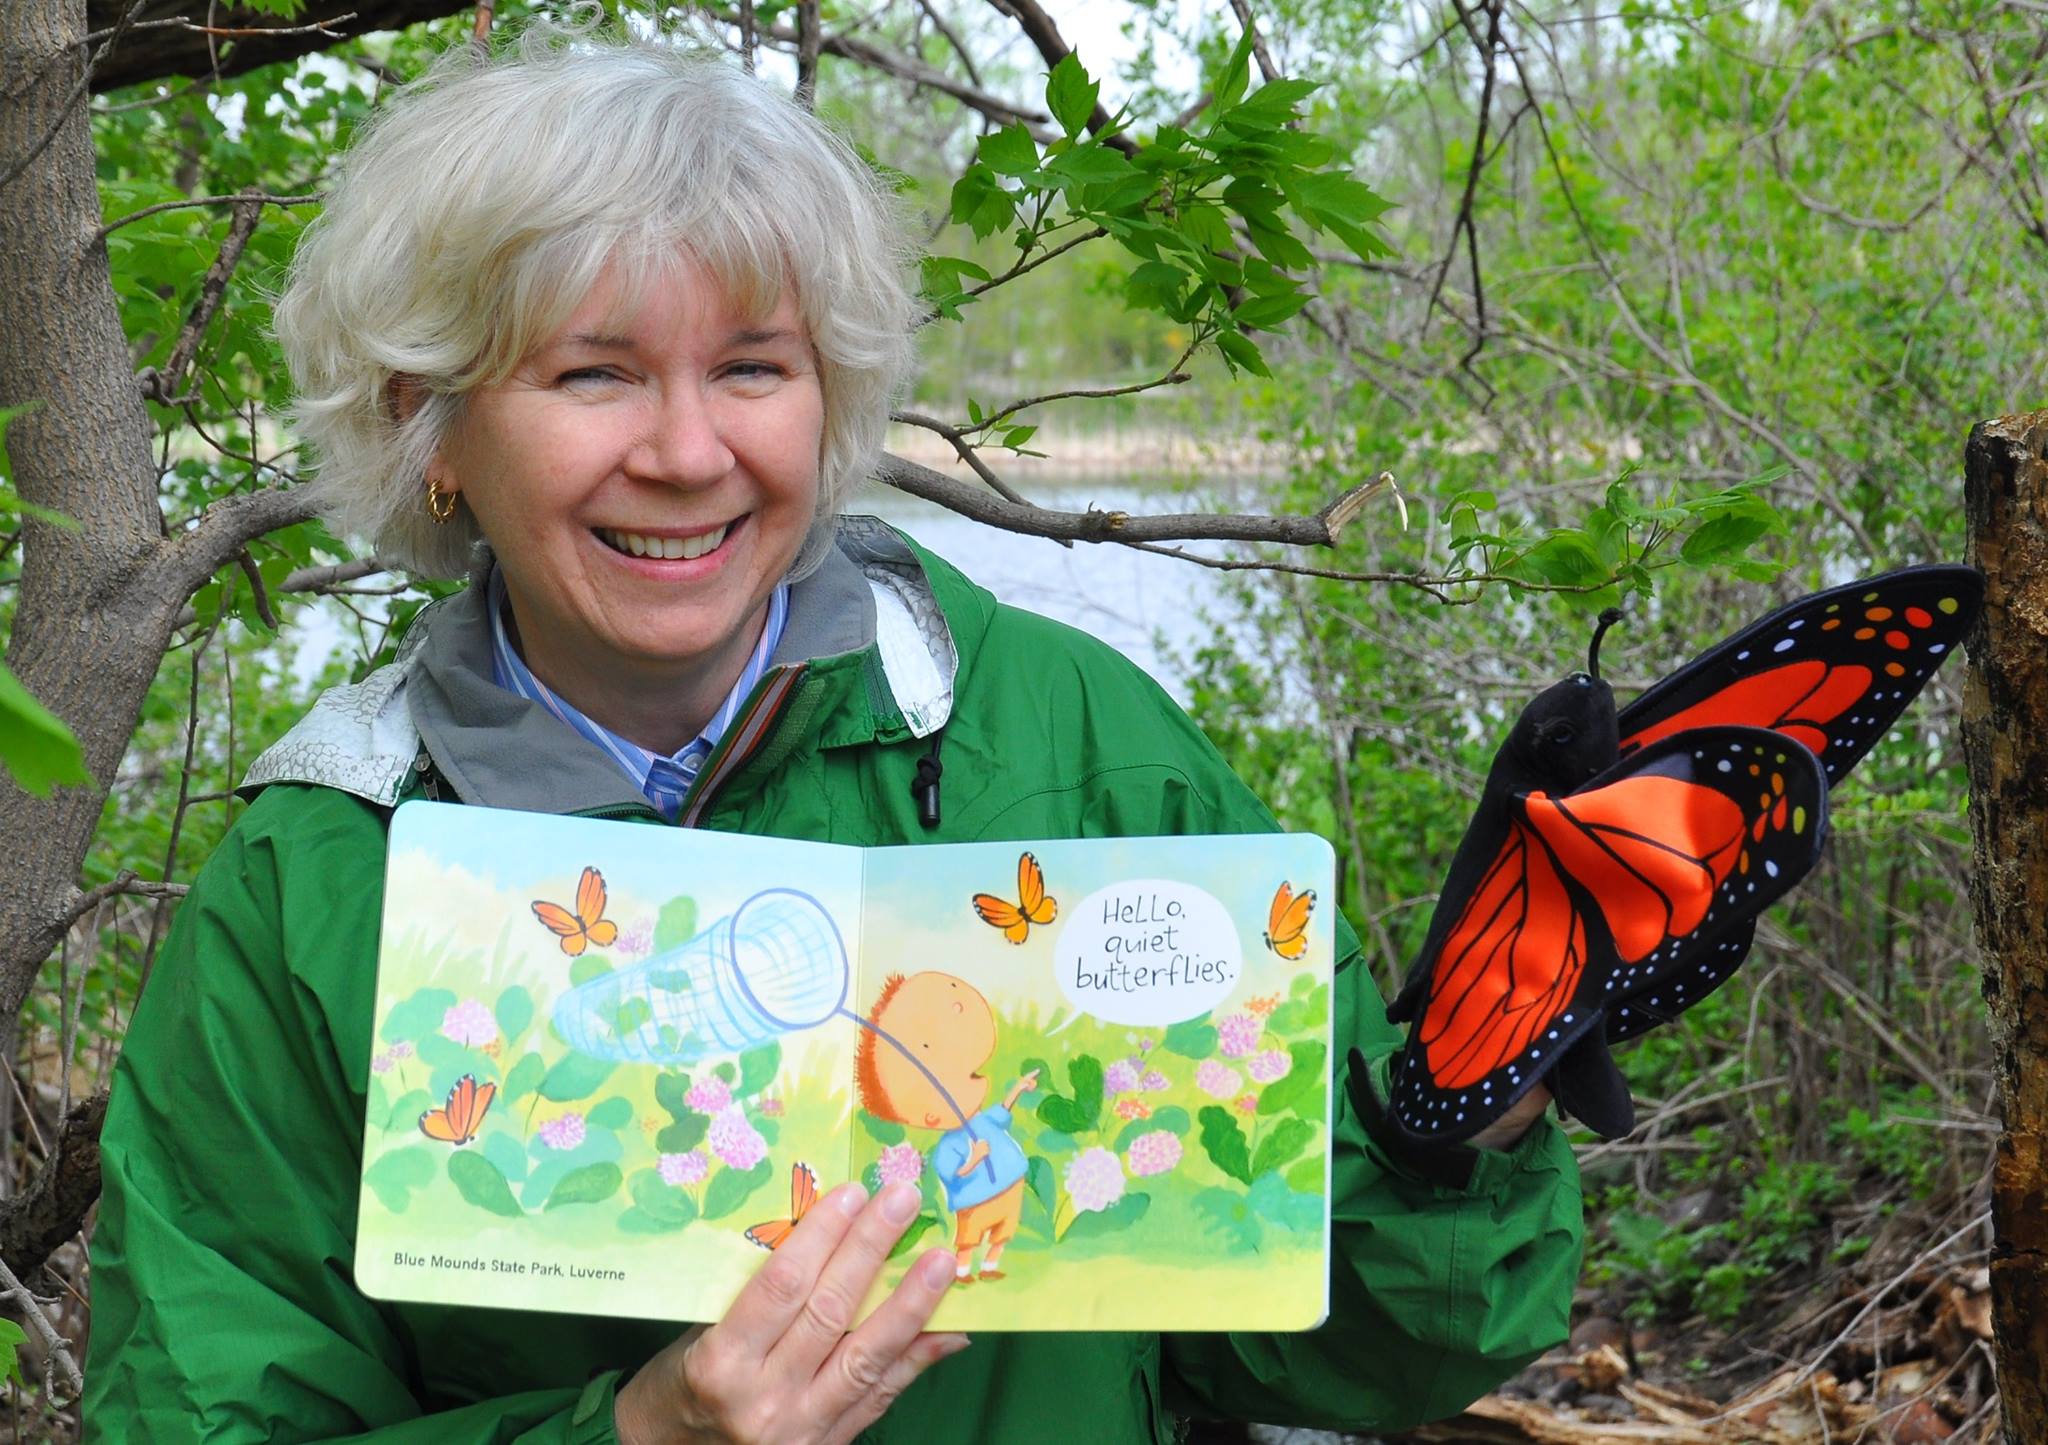 Connie Van Hoven with Hello, Minnesota! and butterfly